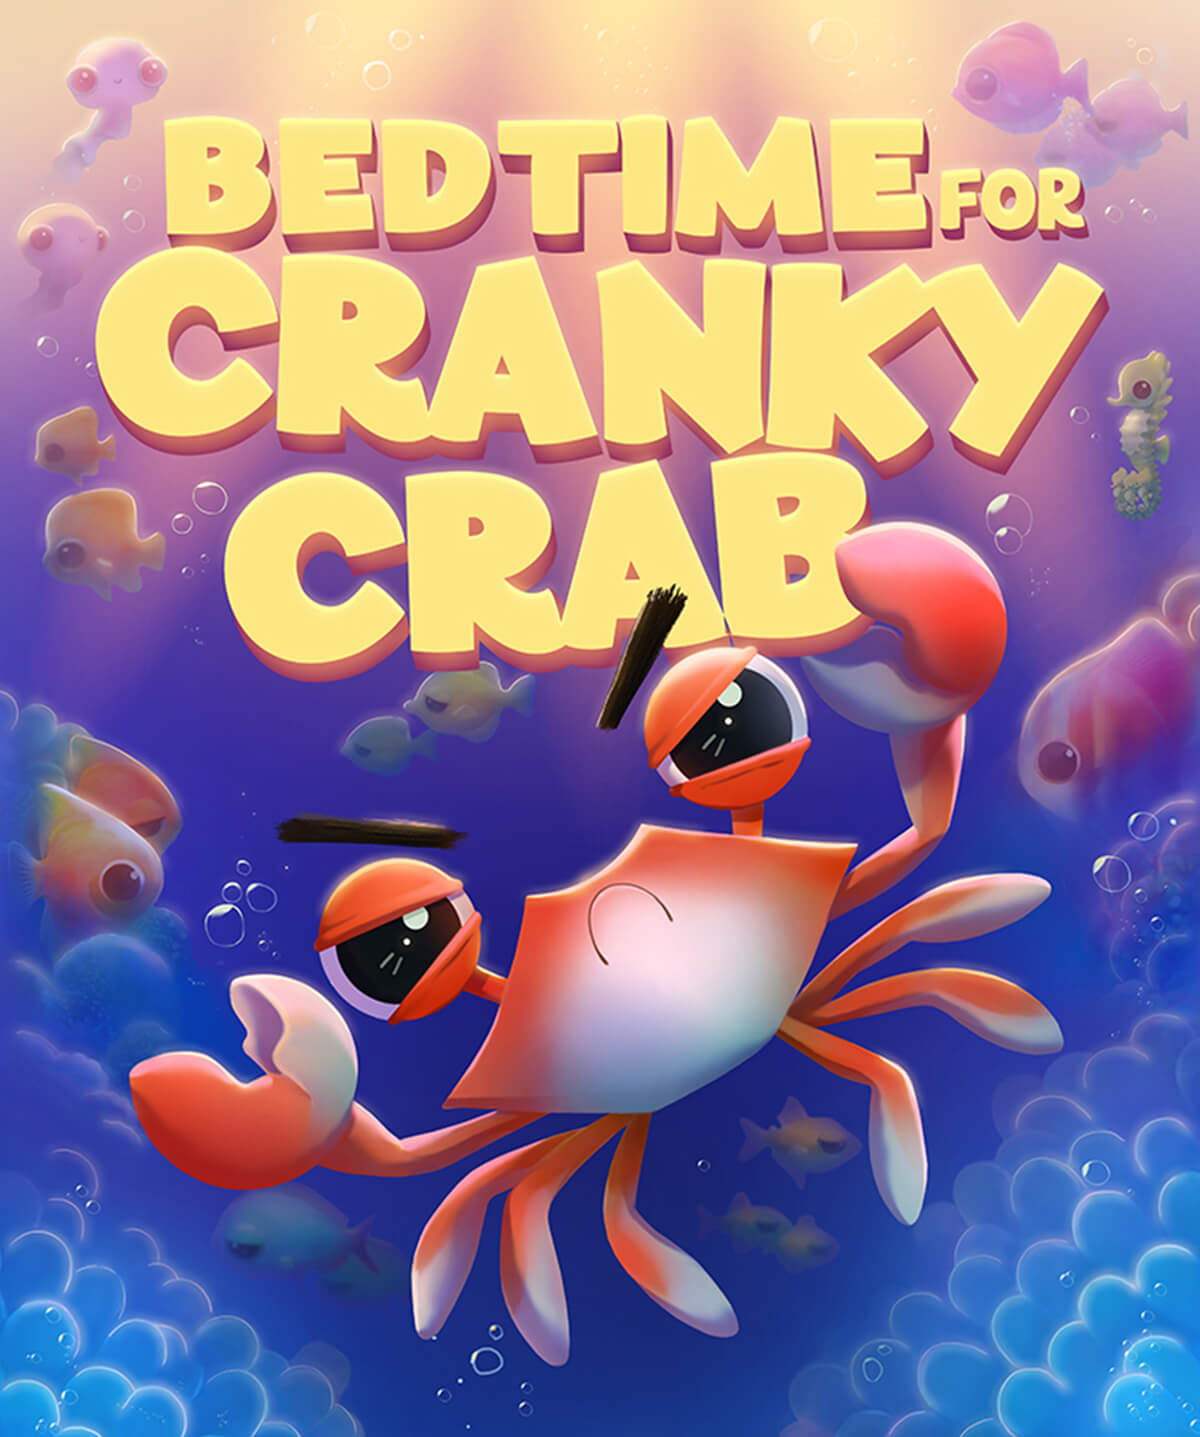 The book cover for Bedtime for Cranky Crab, showing the titular character floating sideways amid a school of fish. 